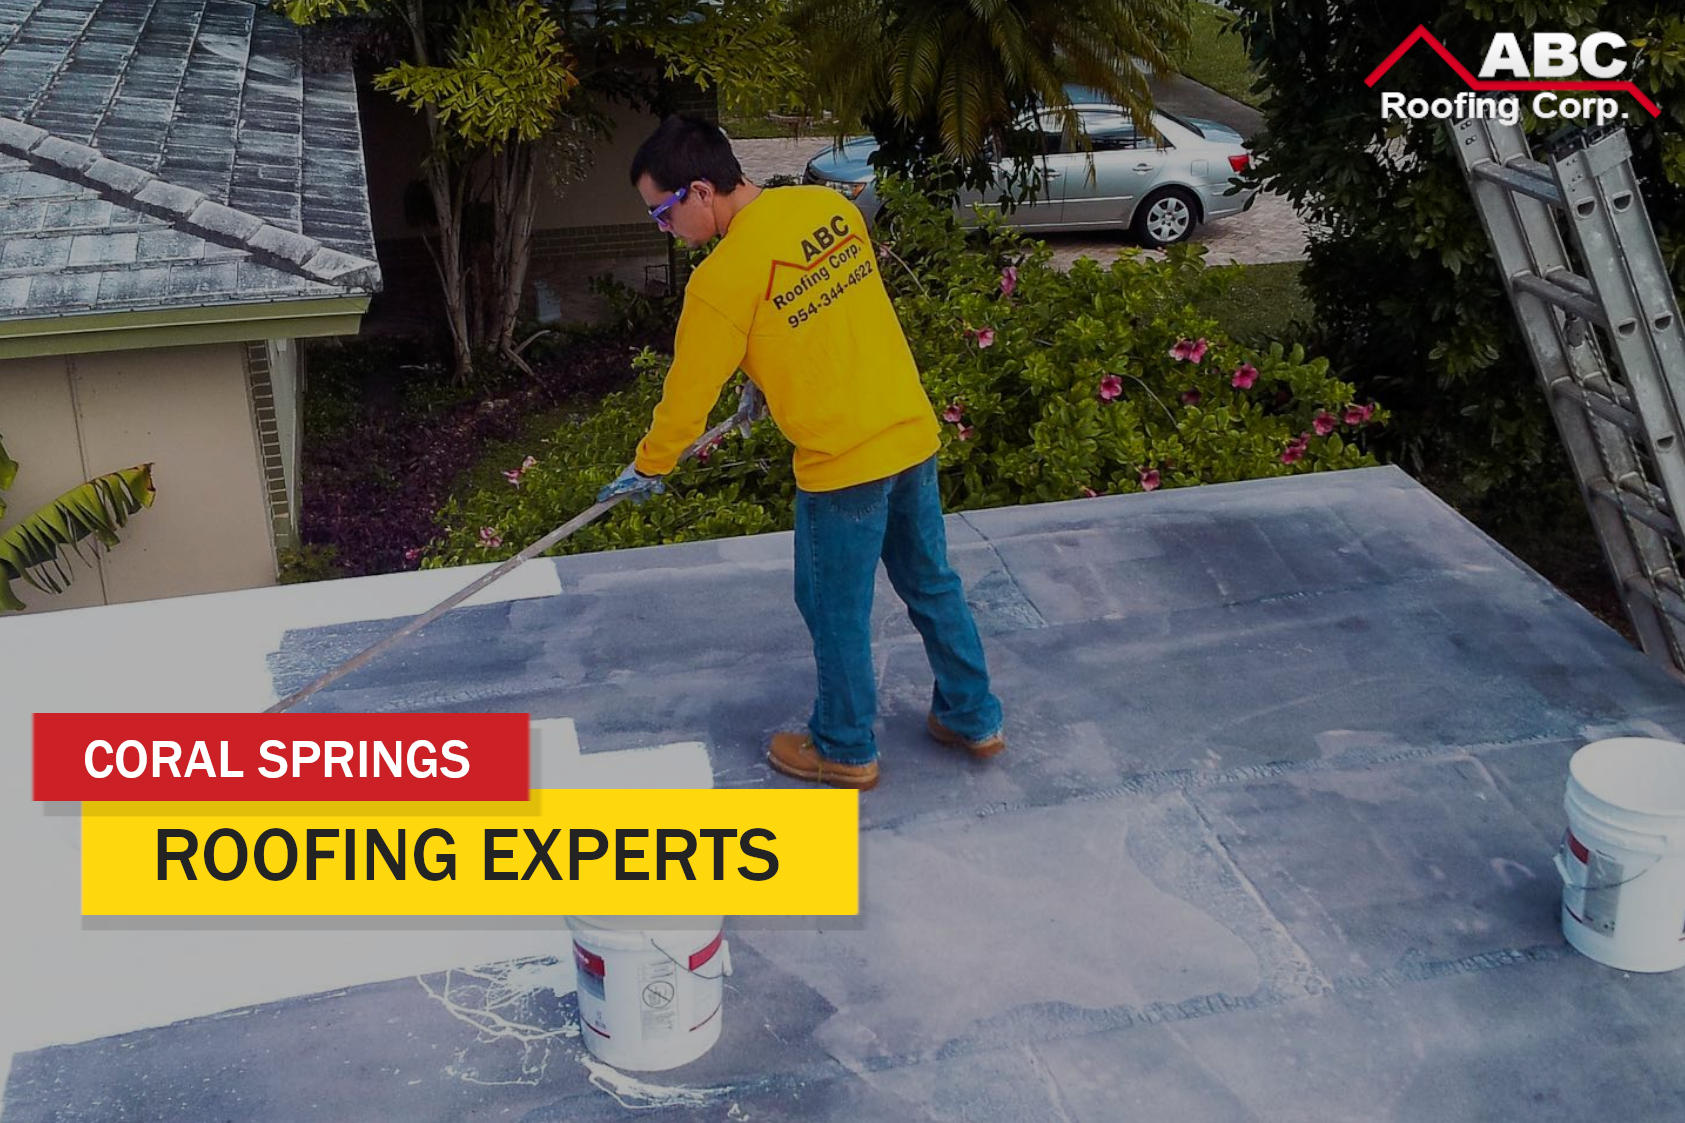 Coral Springs roofing experts